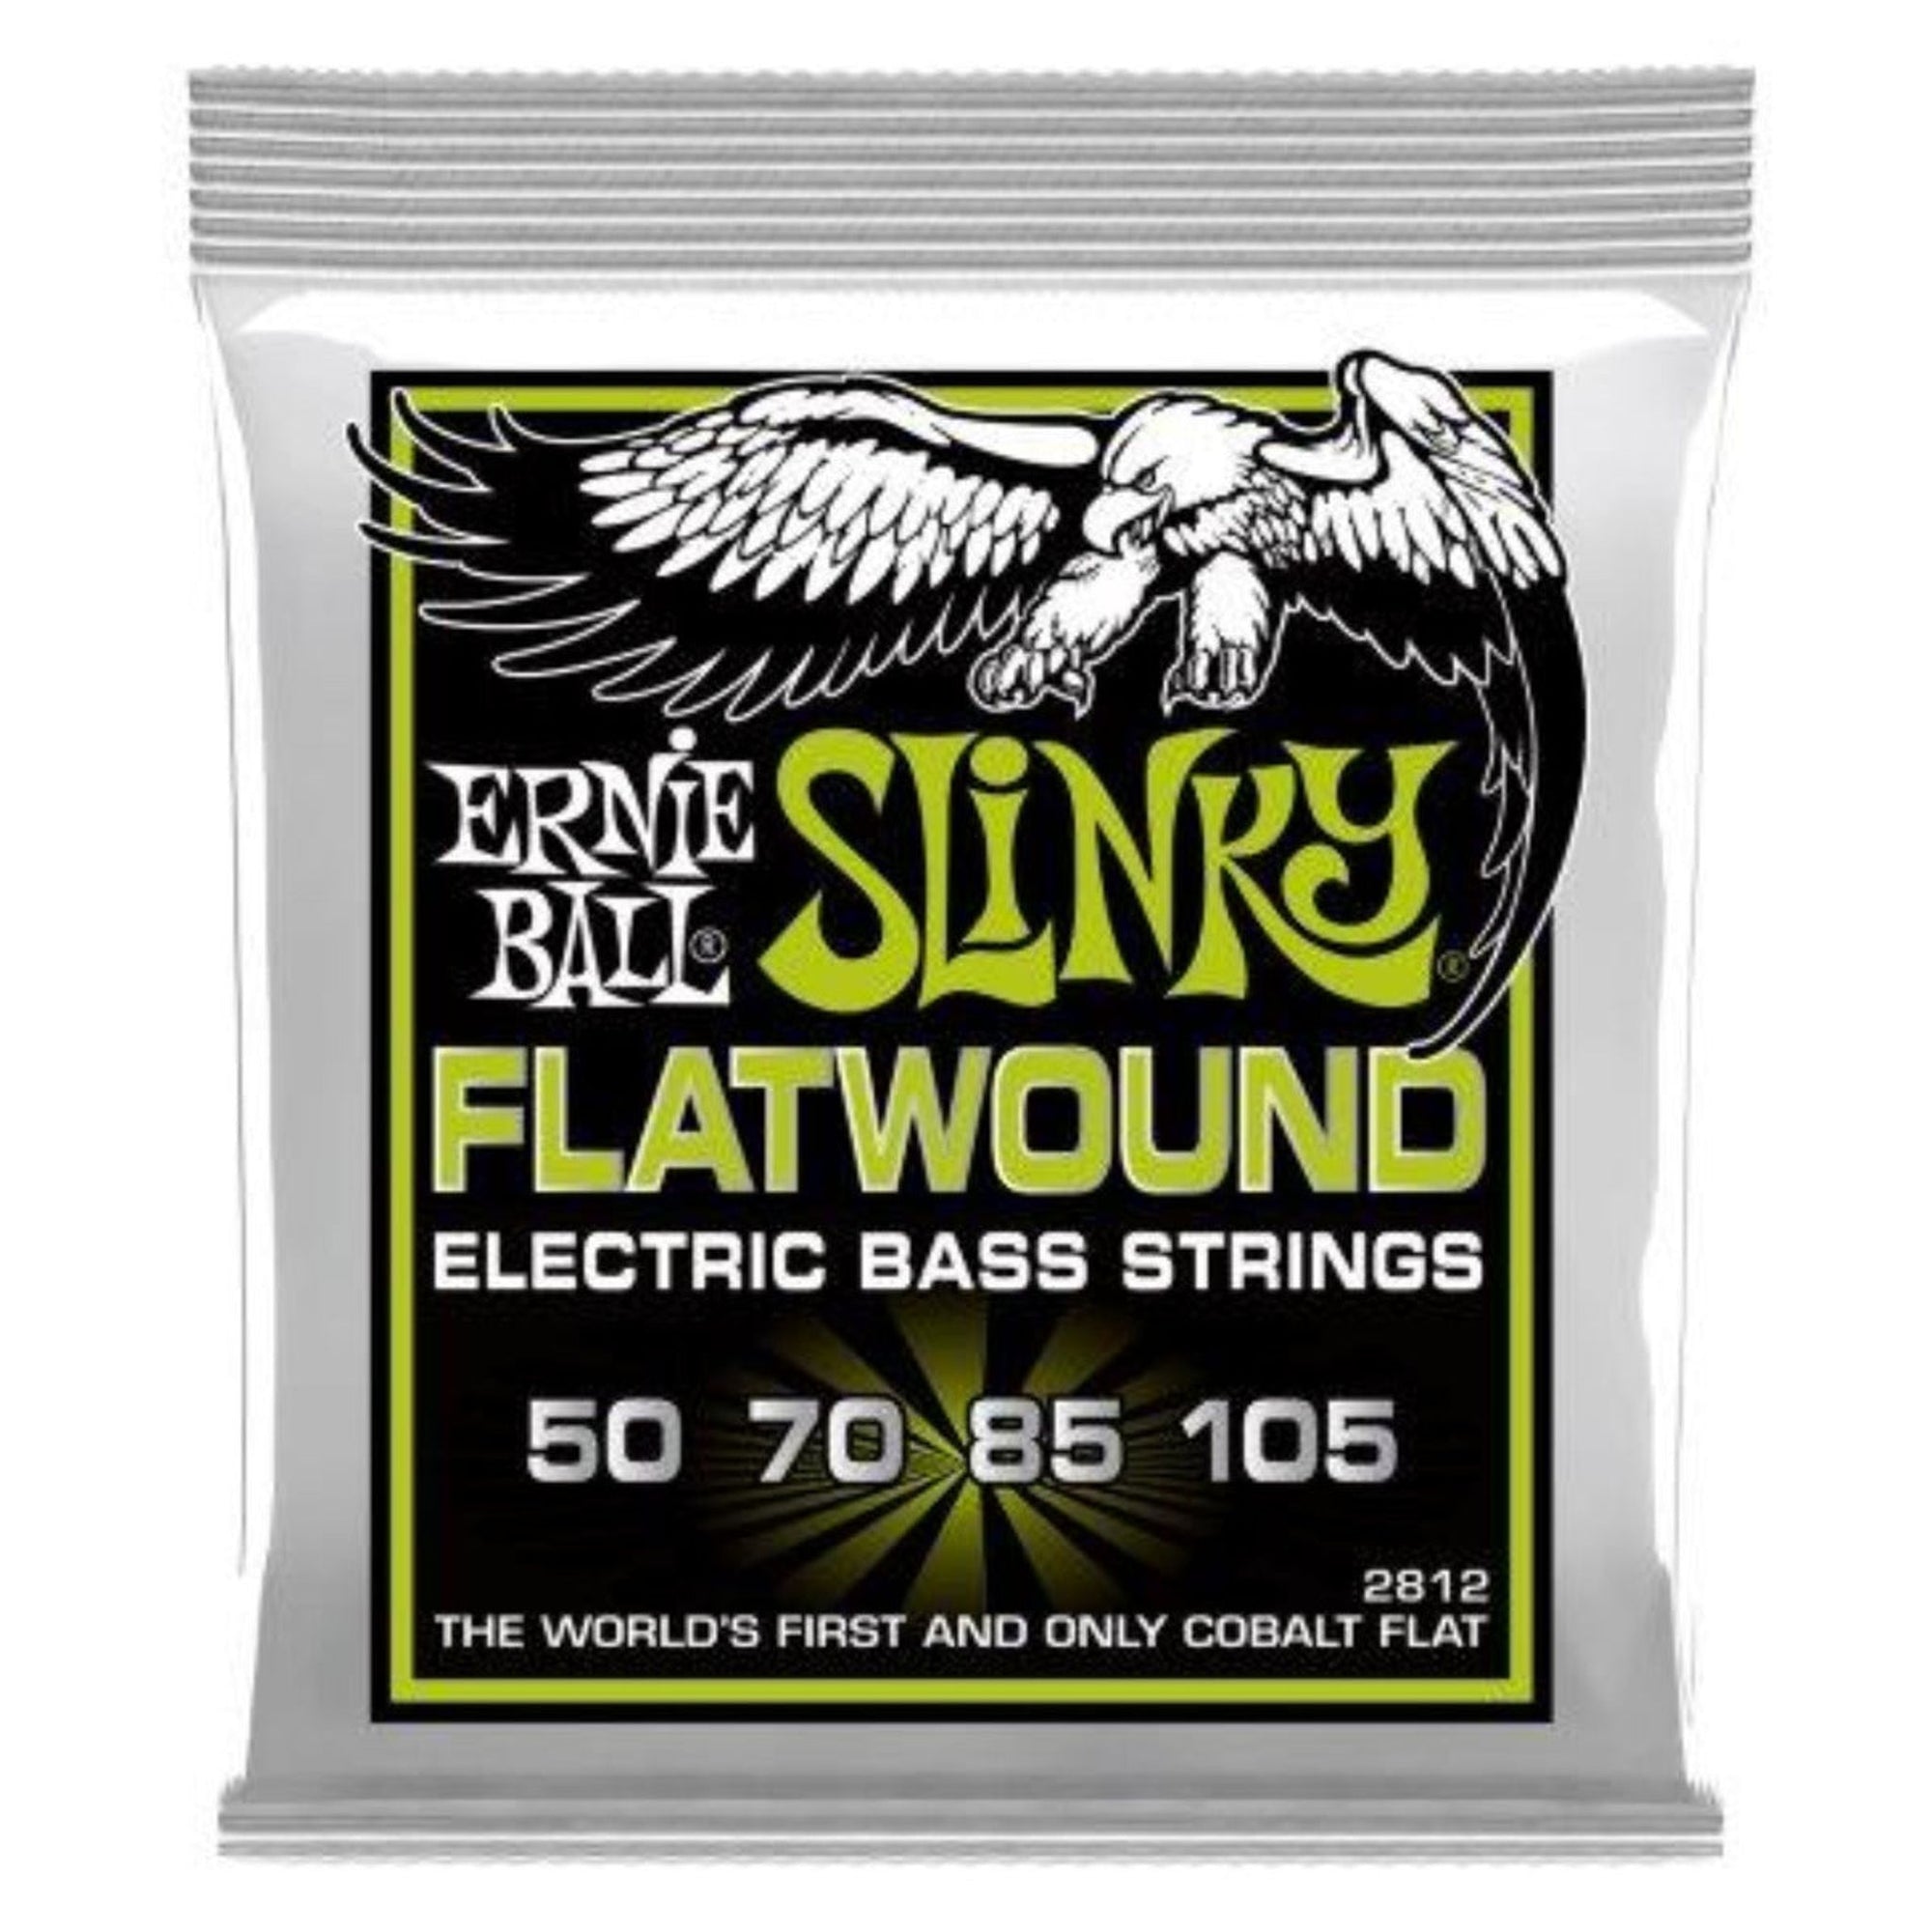 Ernie Ball Slinky Flatwound Bass Strings combine the smooth feel of traditional flats and the power of Cobalt. Featuring a SuperBright Cobalt ribbon wrap, Cobalt underwraps and optimal hex-core to wrap ratio, the new Flatwound Bass strings are the first flat that actually feels like a flat and sounds like a round.